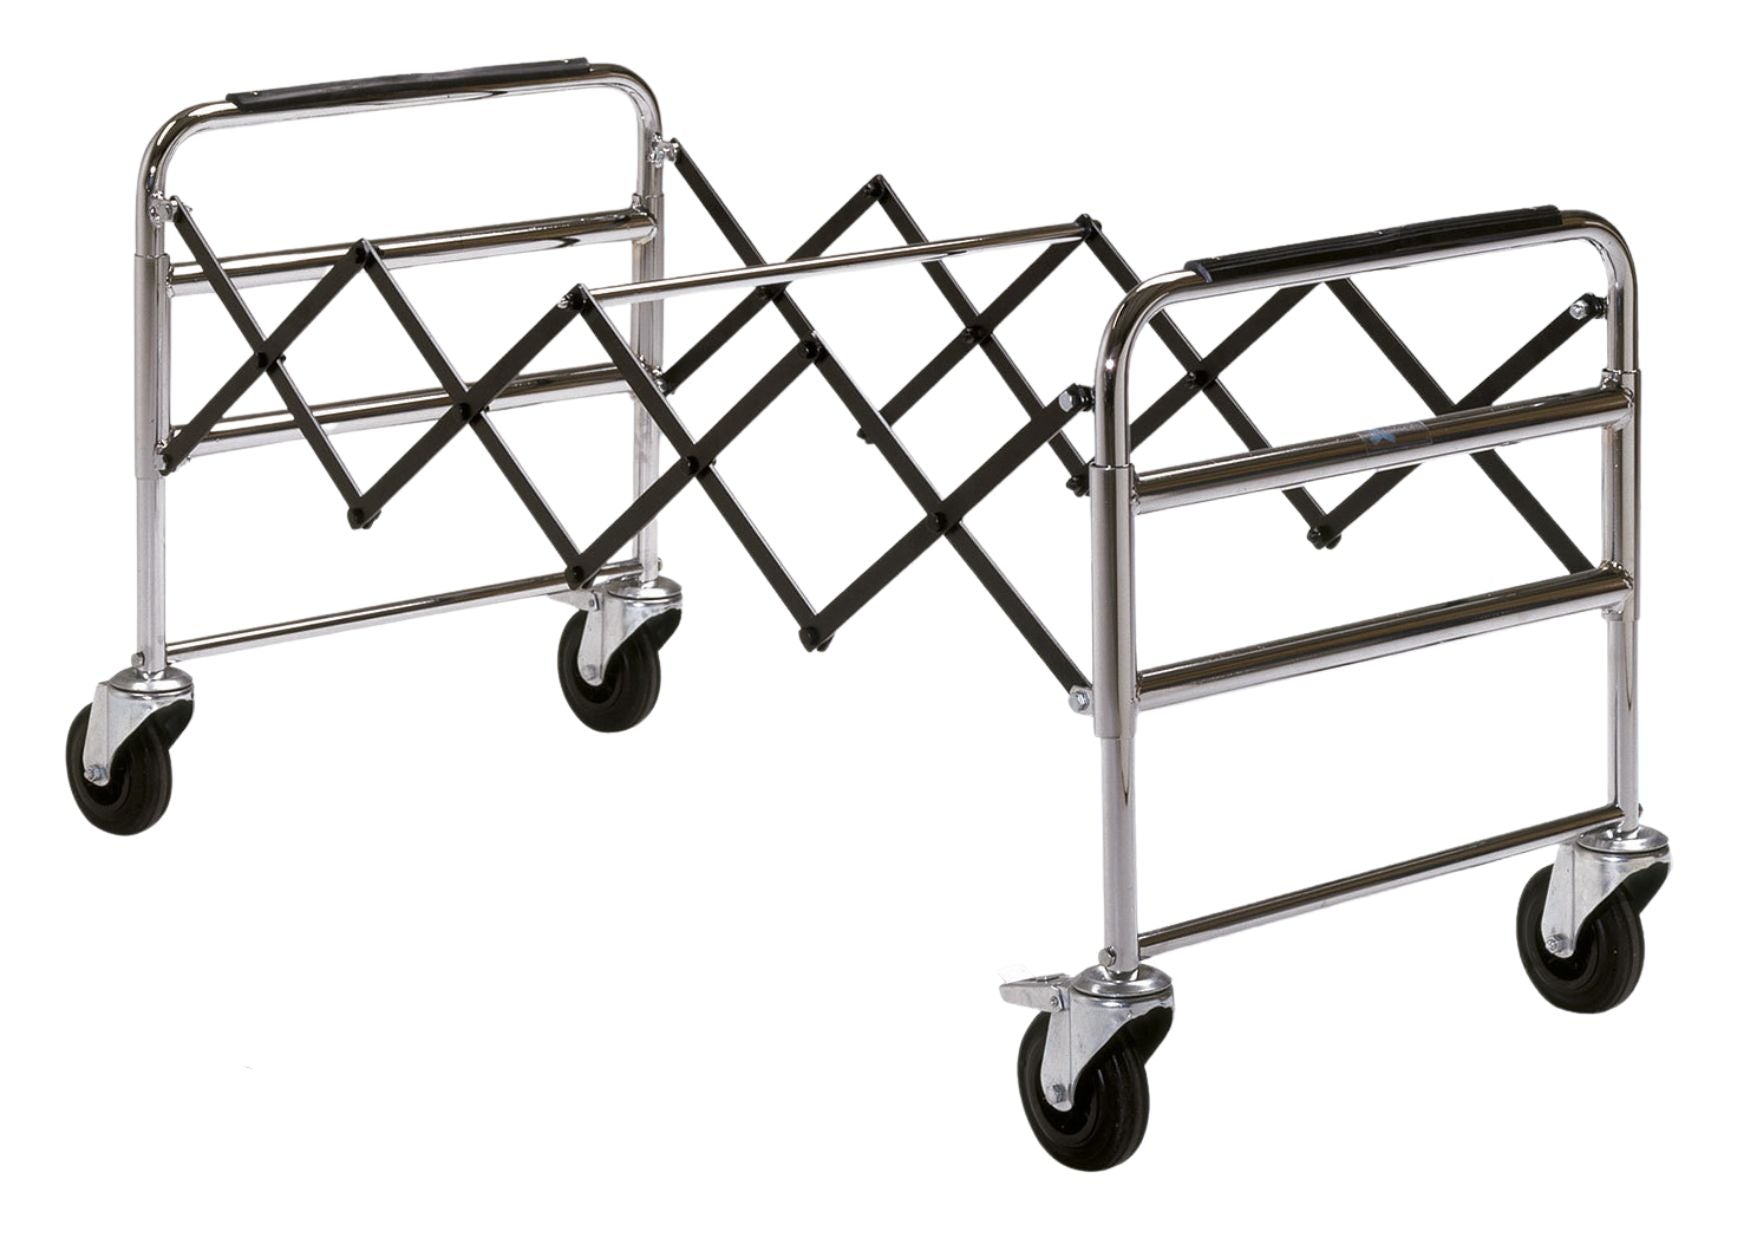 Scissor trolley can be pulled apart lengthways